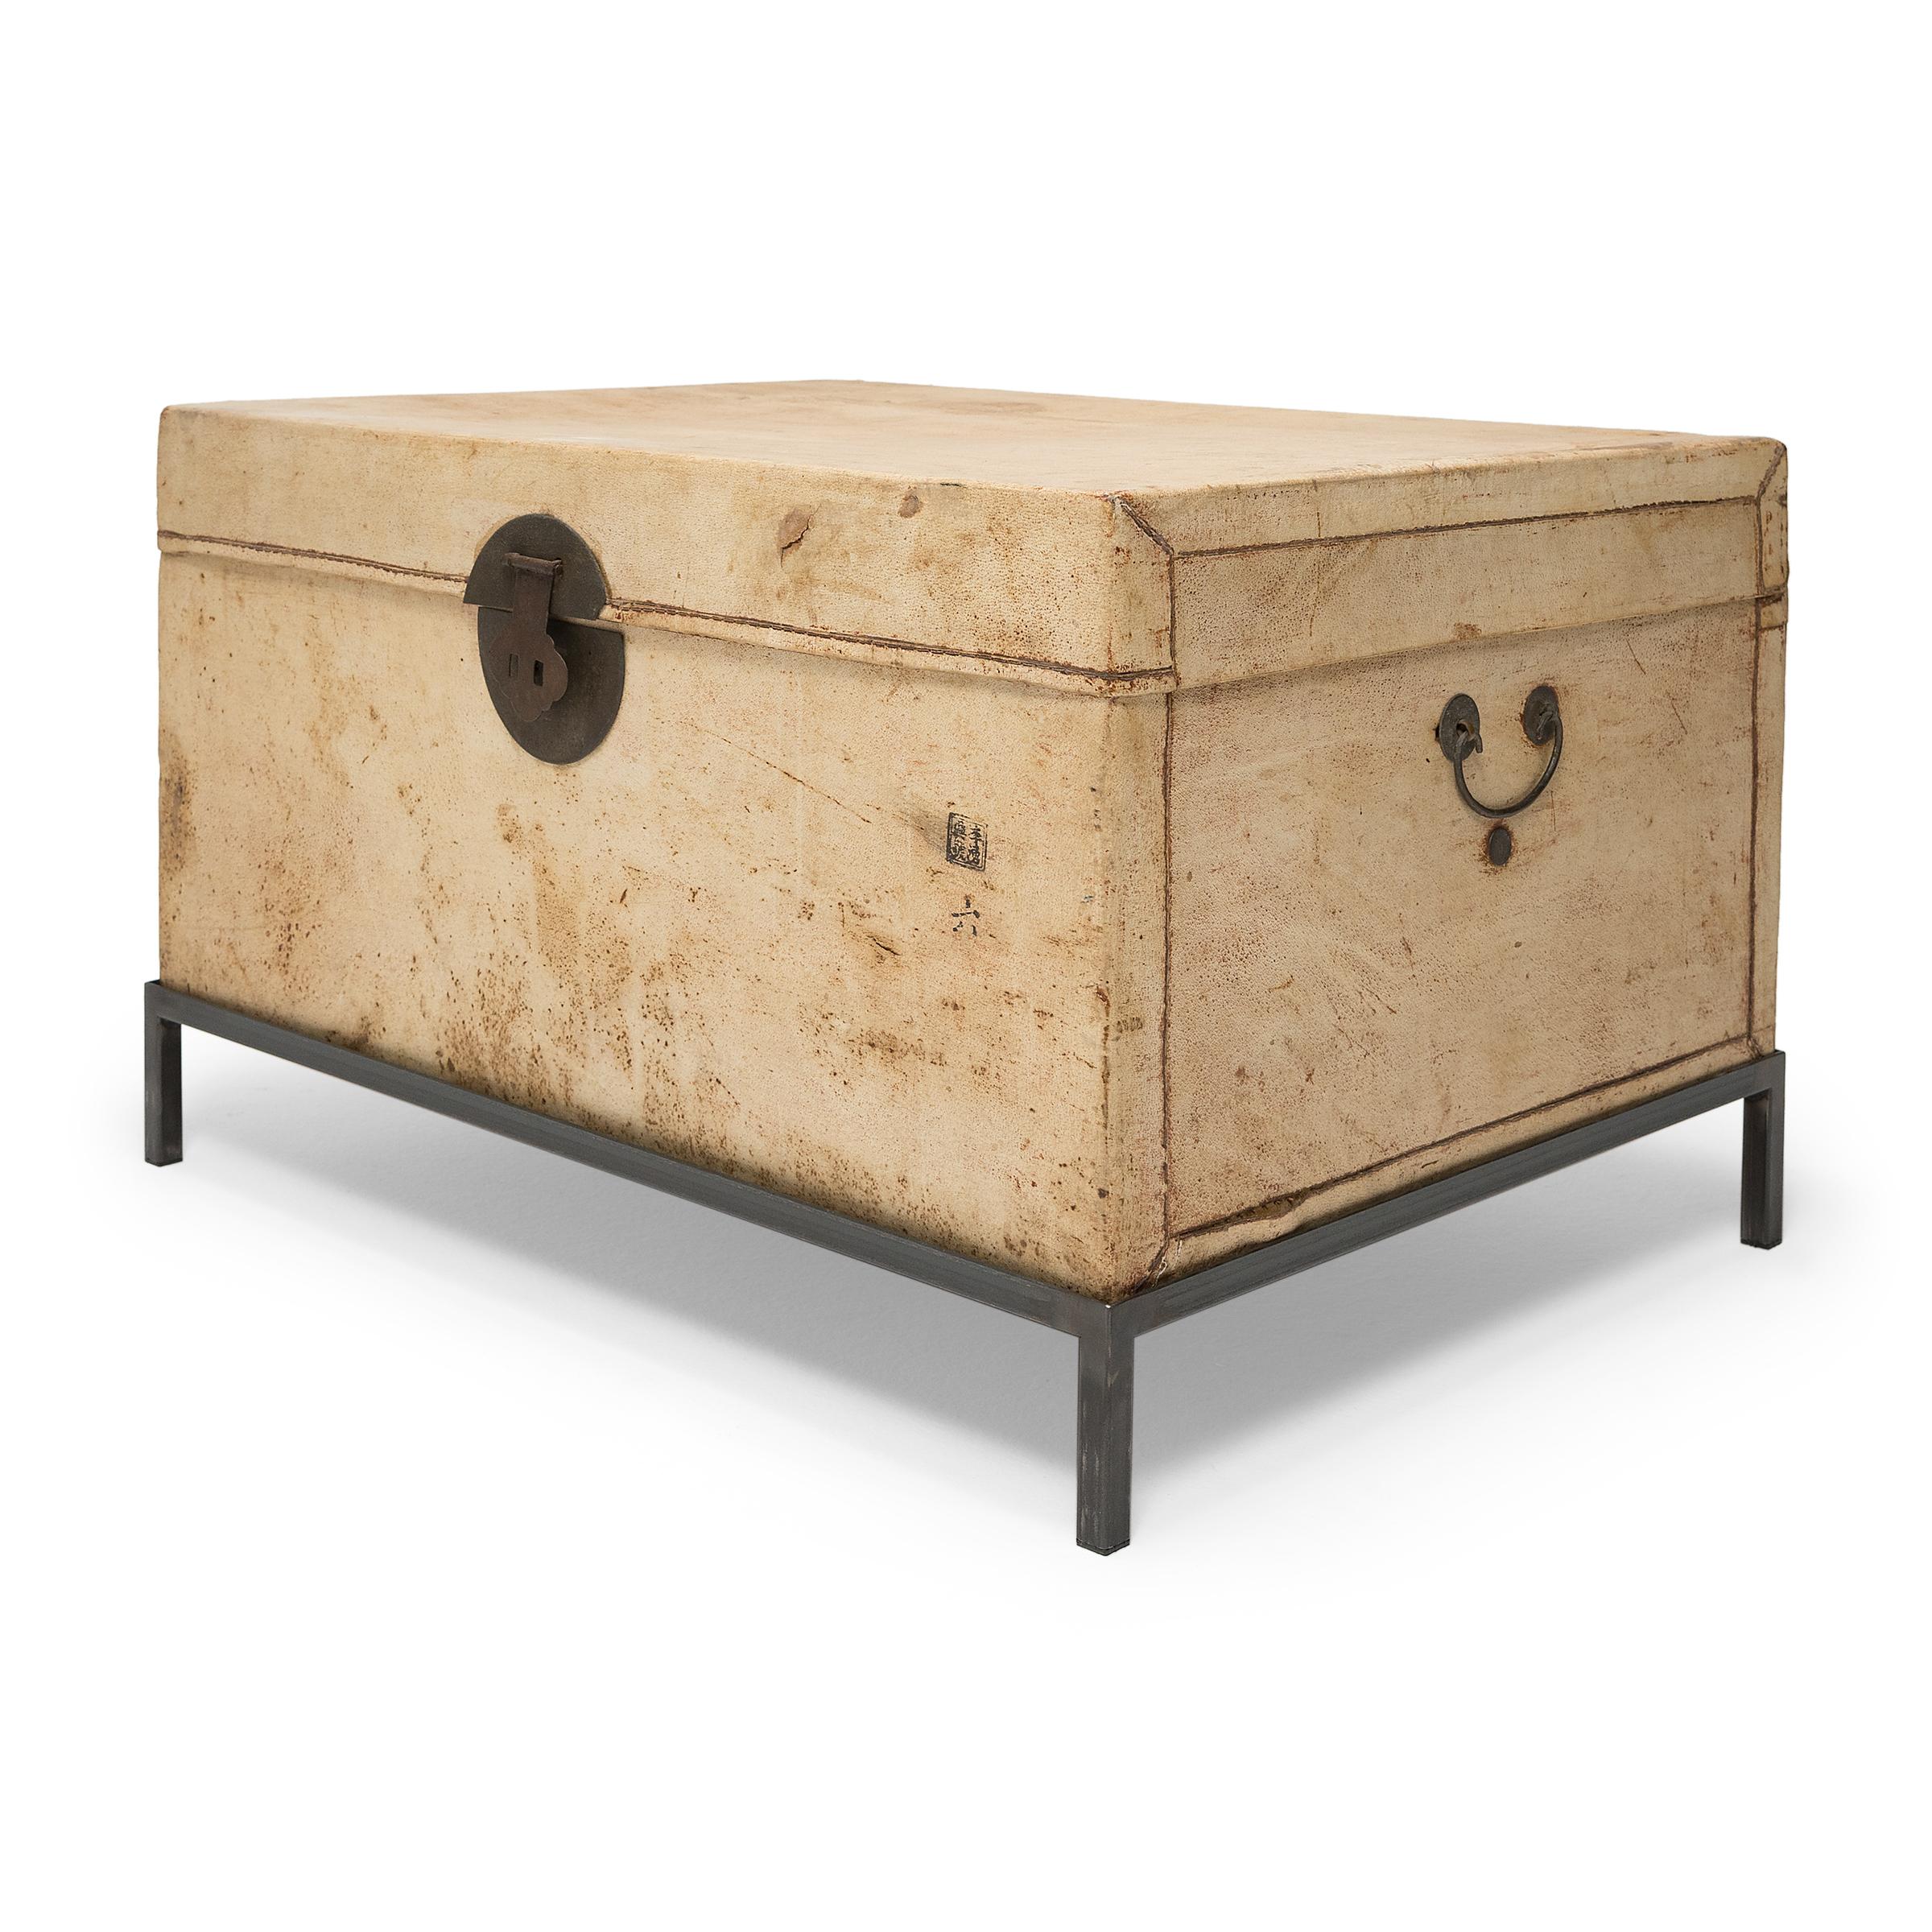 Qing Blonde Chinese Hide Trunk Table, C. 1800